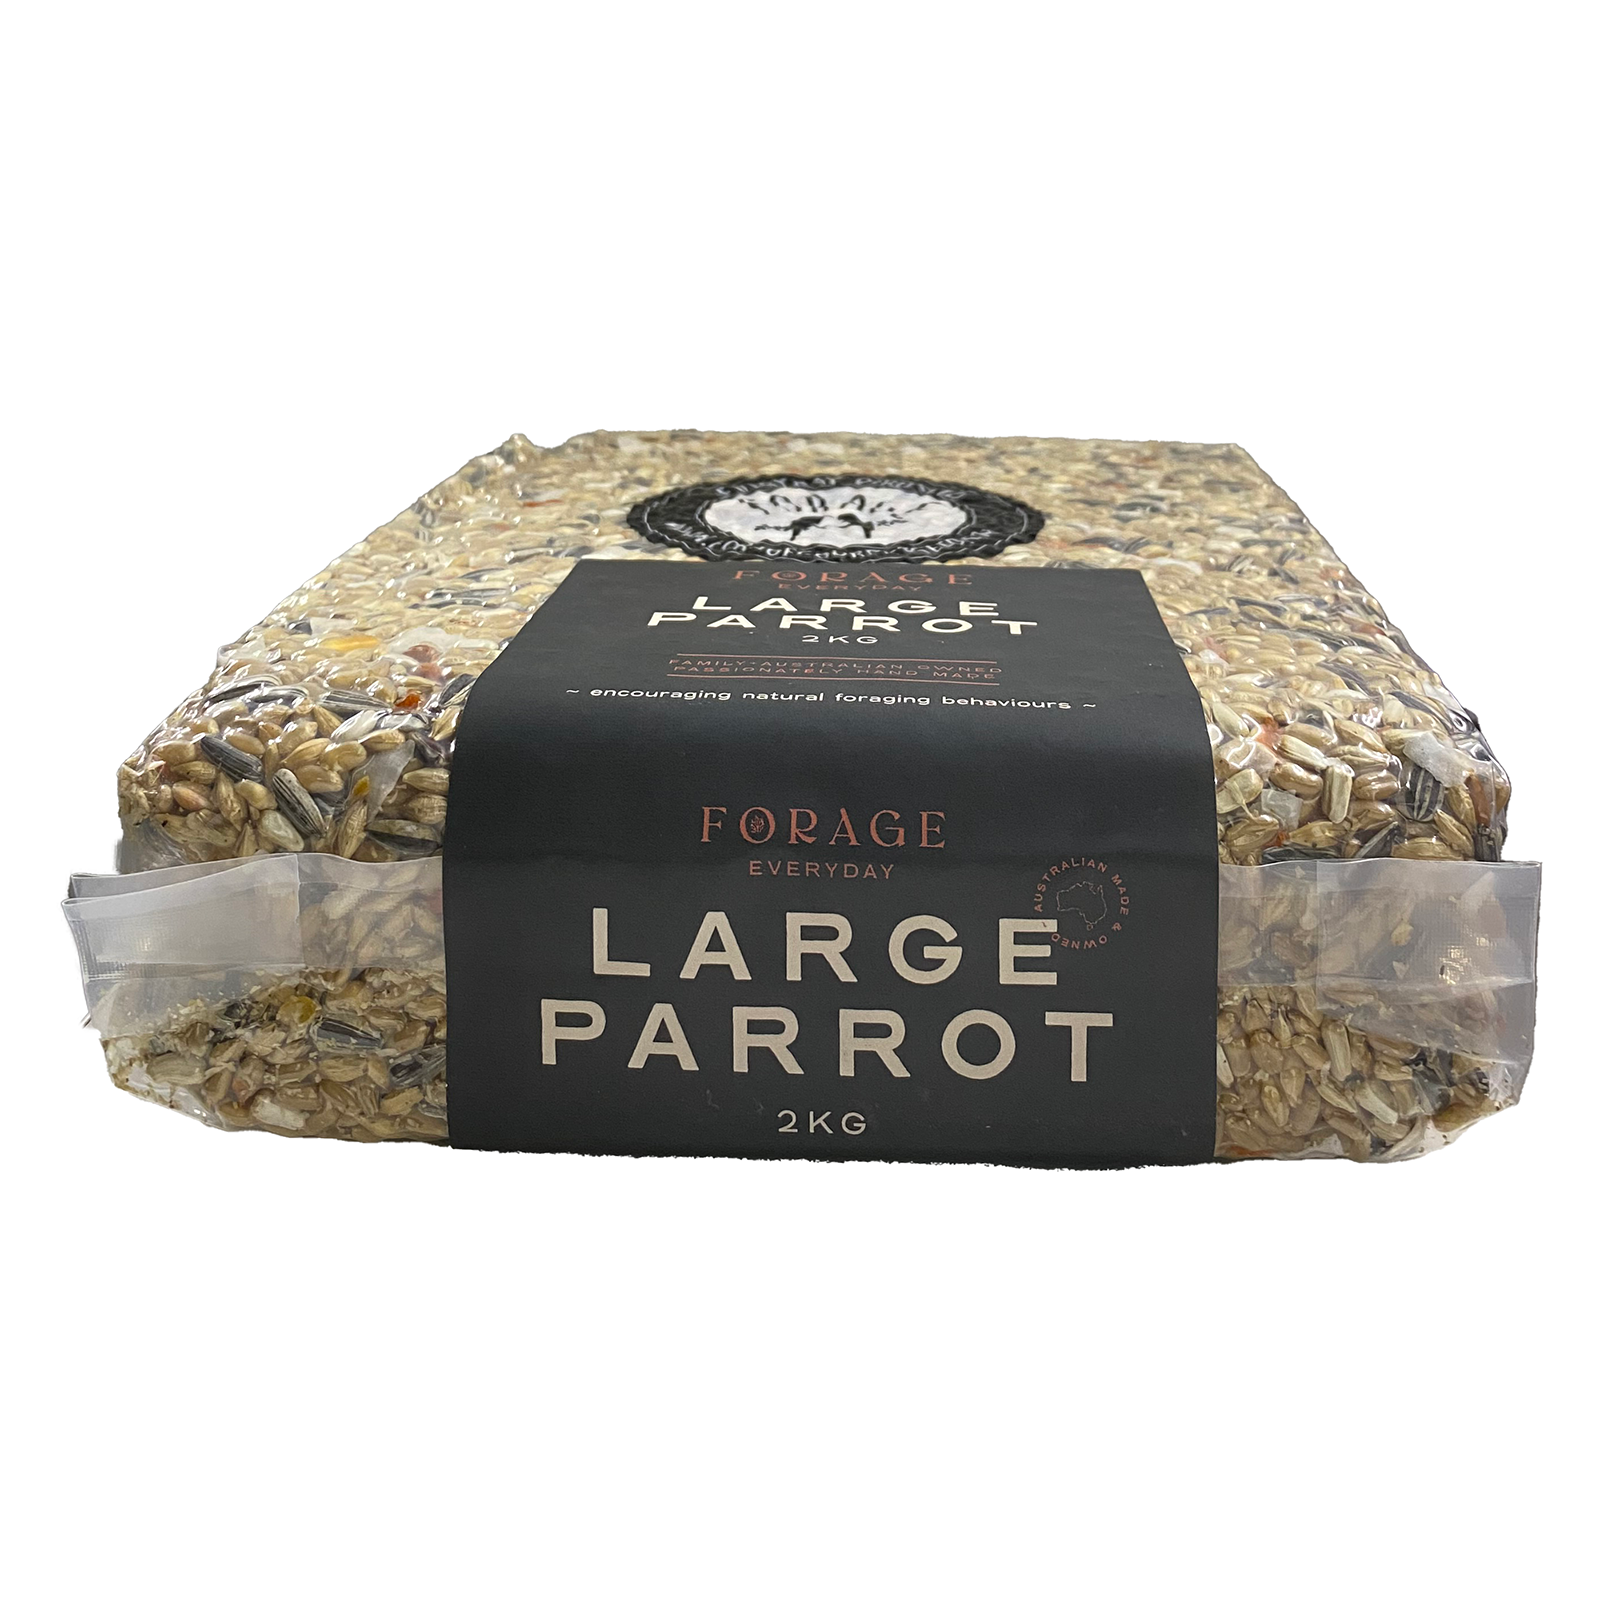 Forage Everyday Birdseed Large Parrot